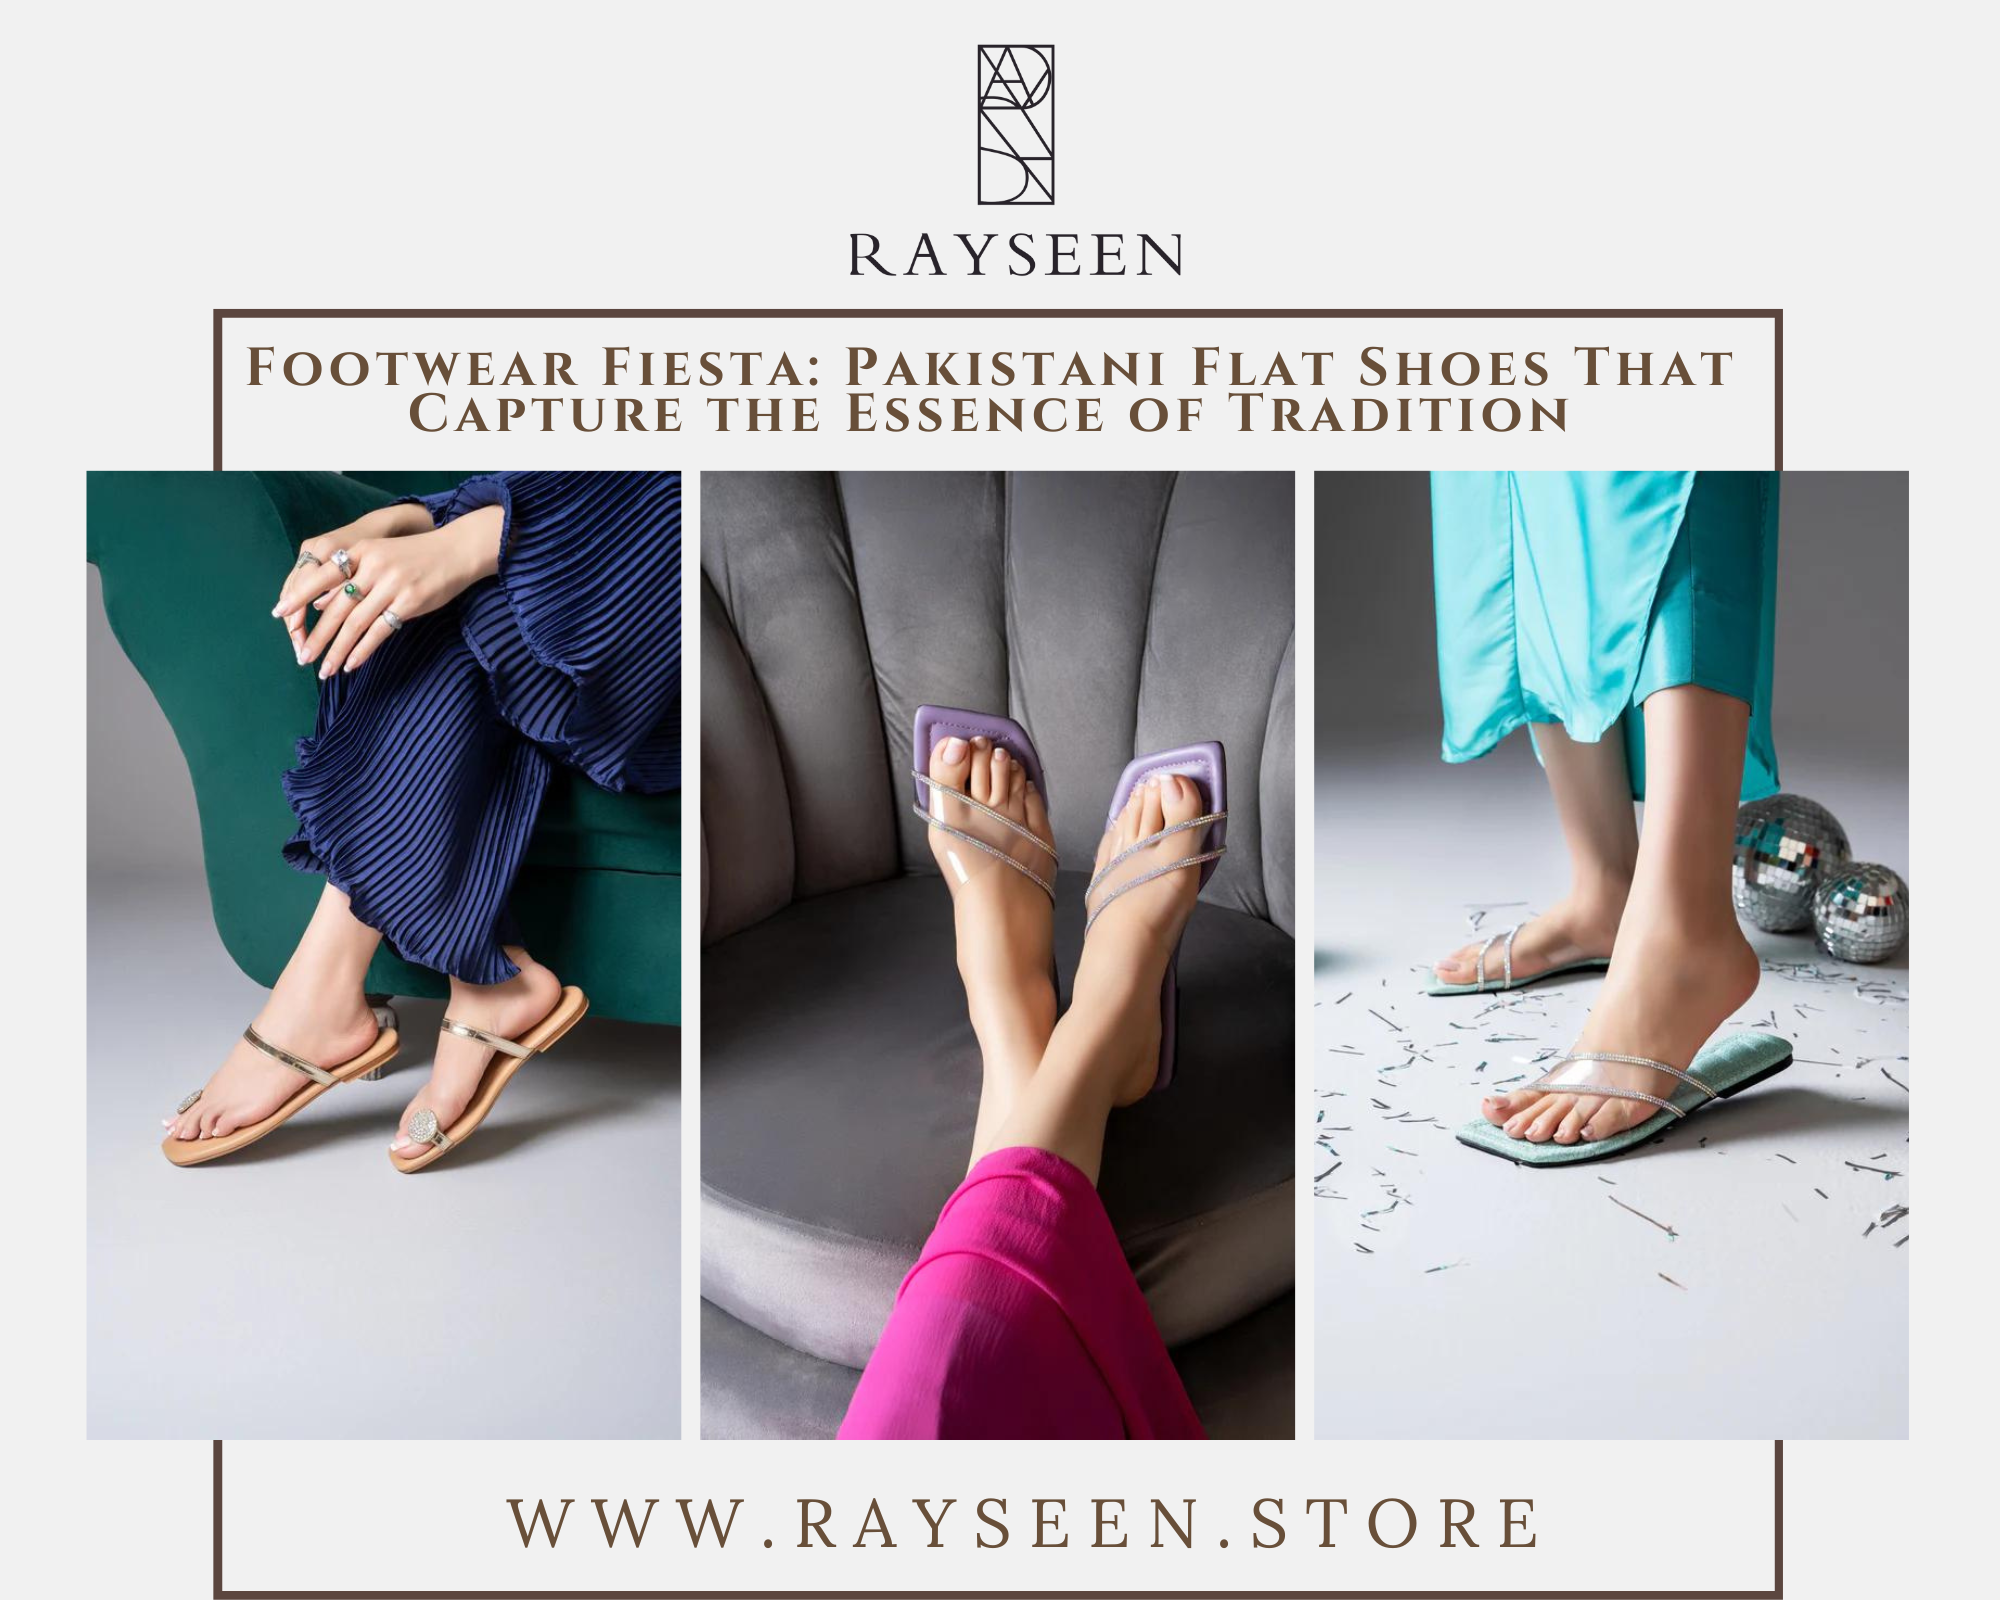 Footwear Fiesta: Pakistani Flat Shoes That Capture the Essence of Tradition